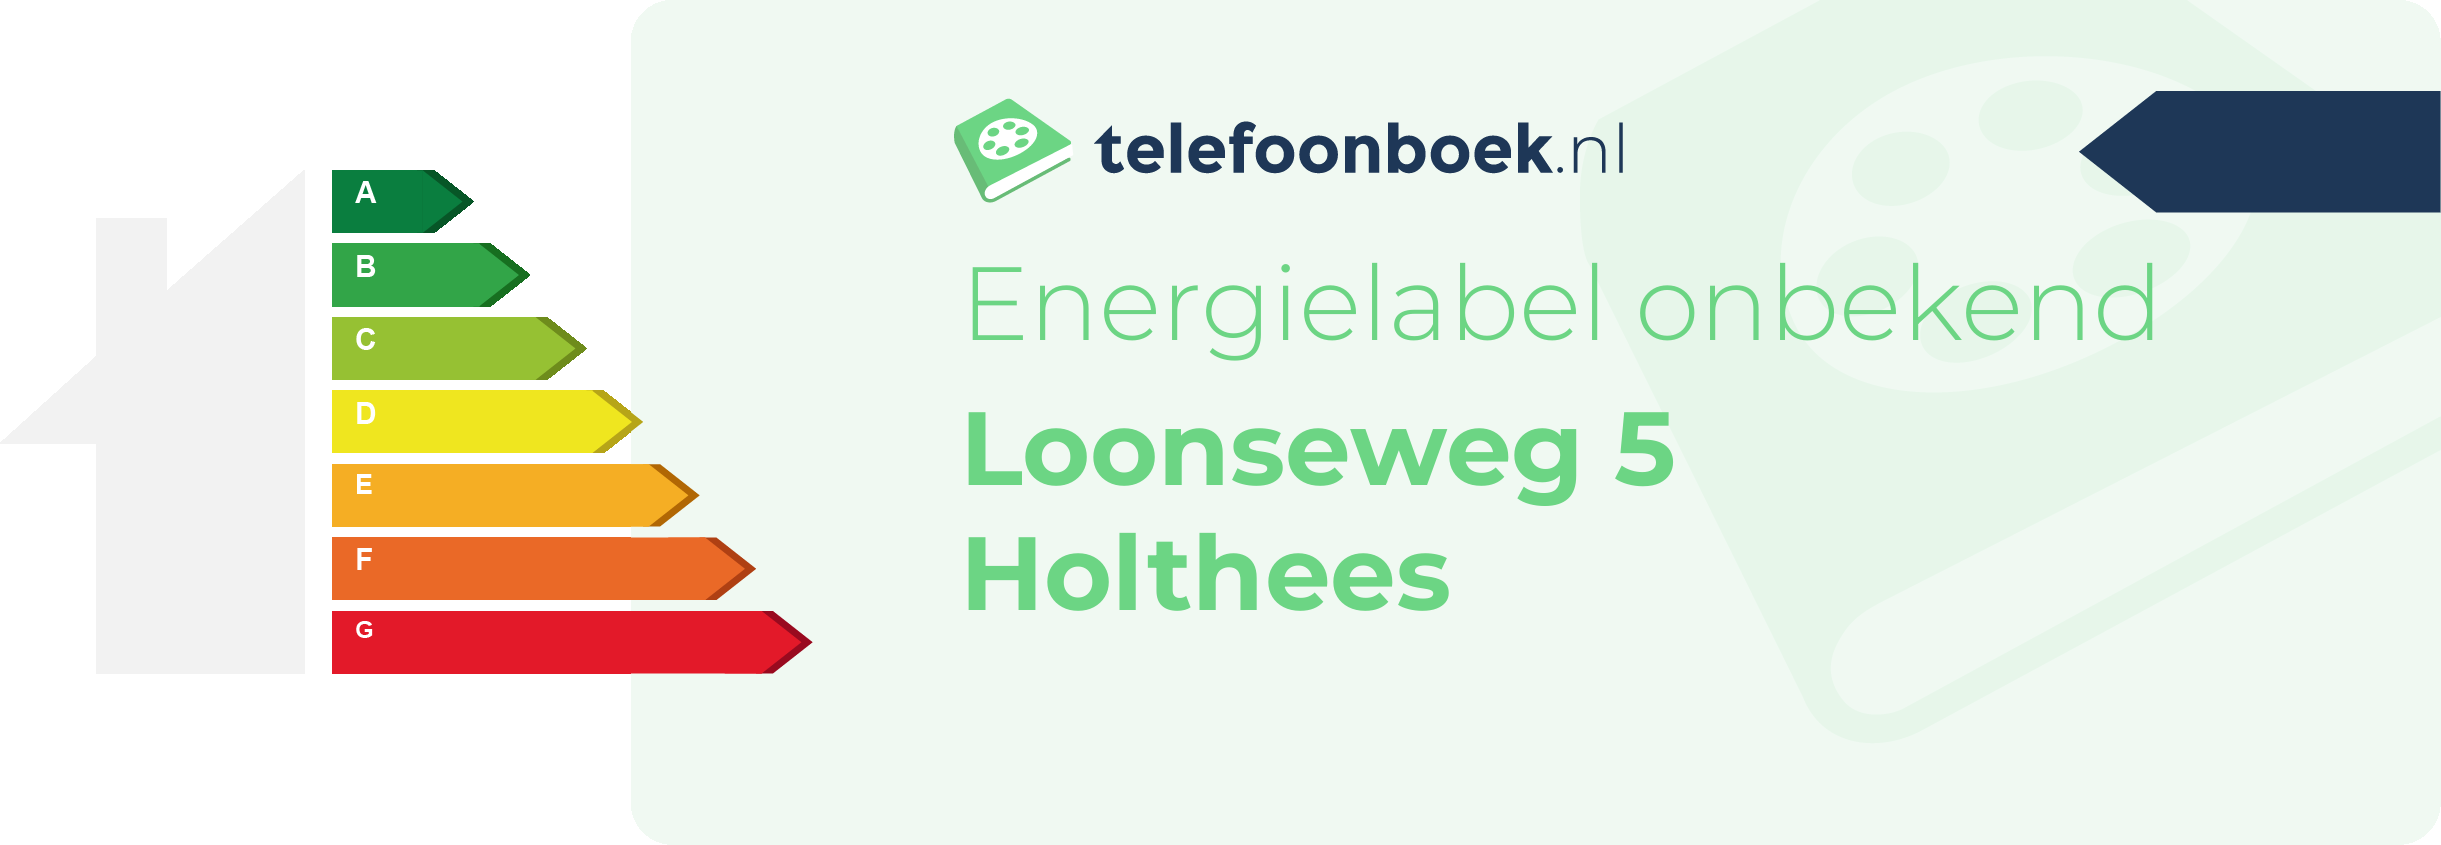 Energielabel Loonseweg 5 Holthees